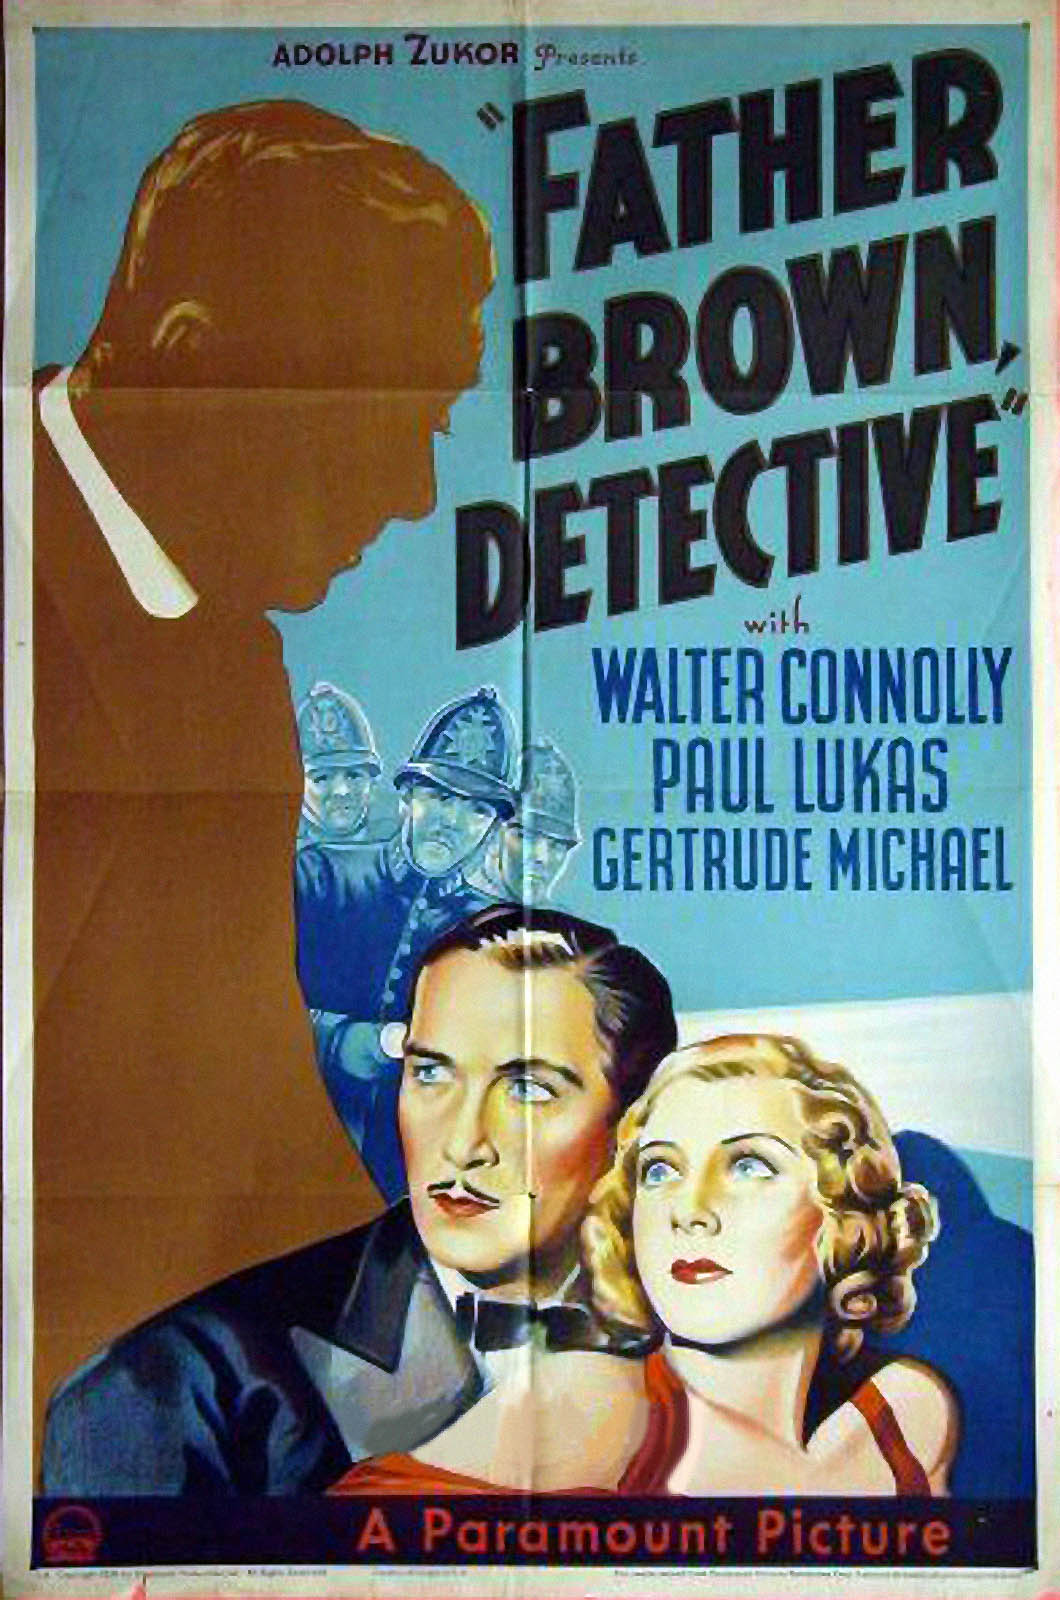 FATHER BROWN, DETECTIVE